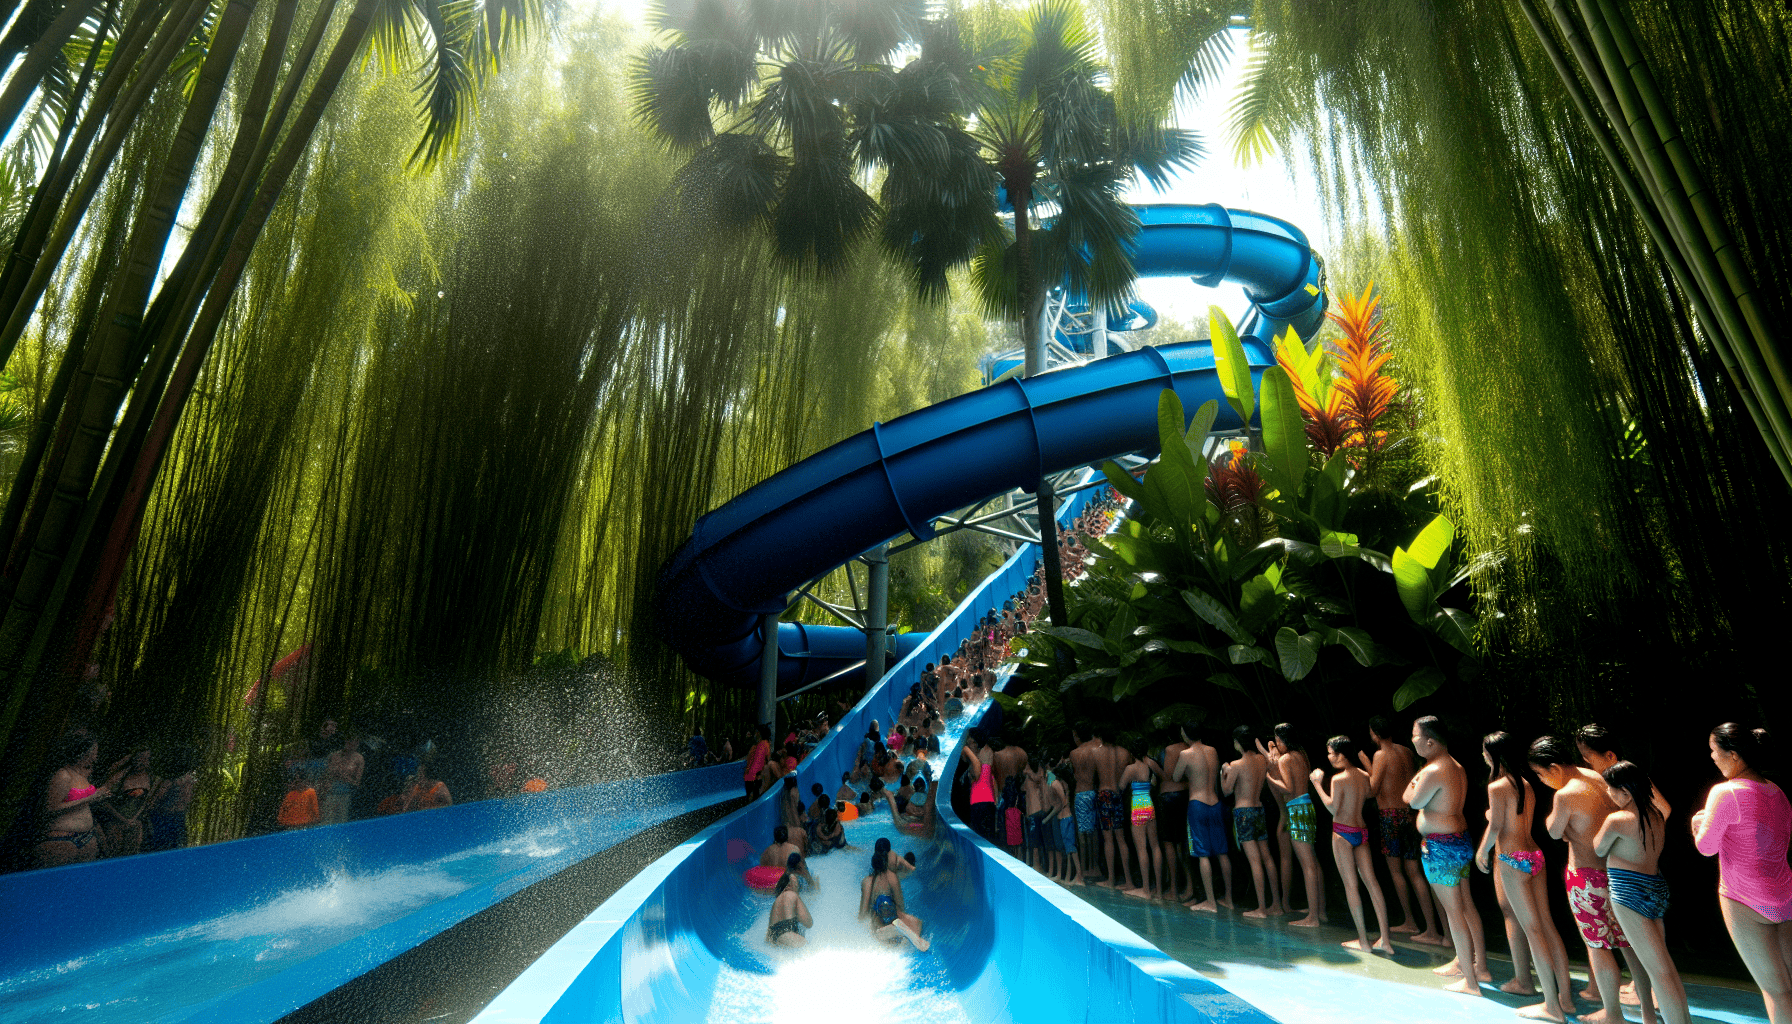 Thrilling water slide at Siam Park